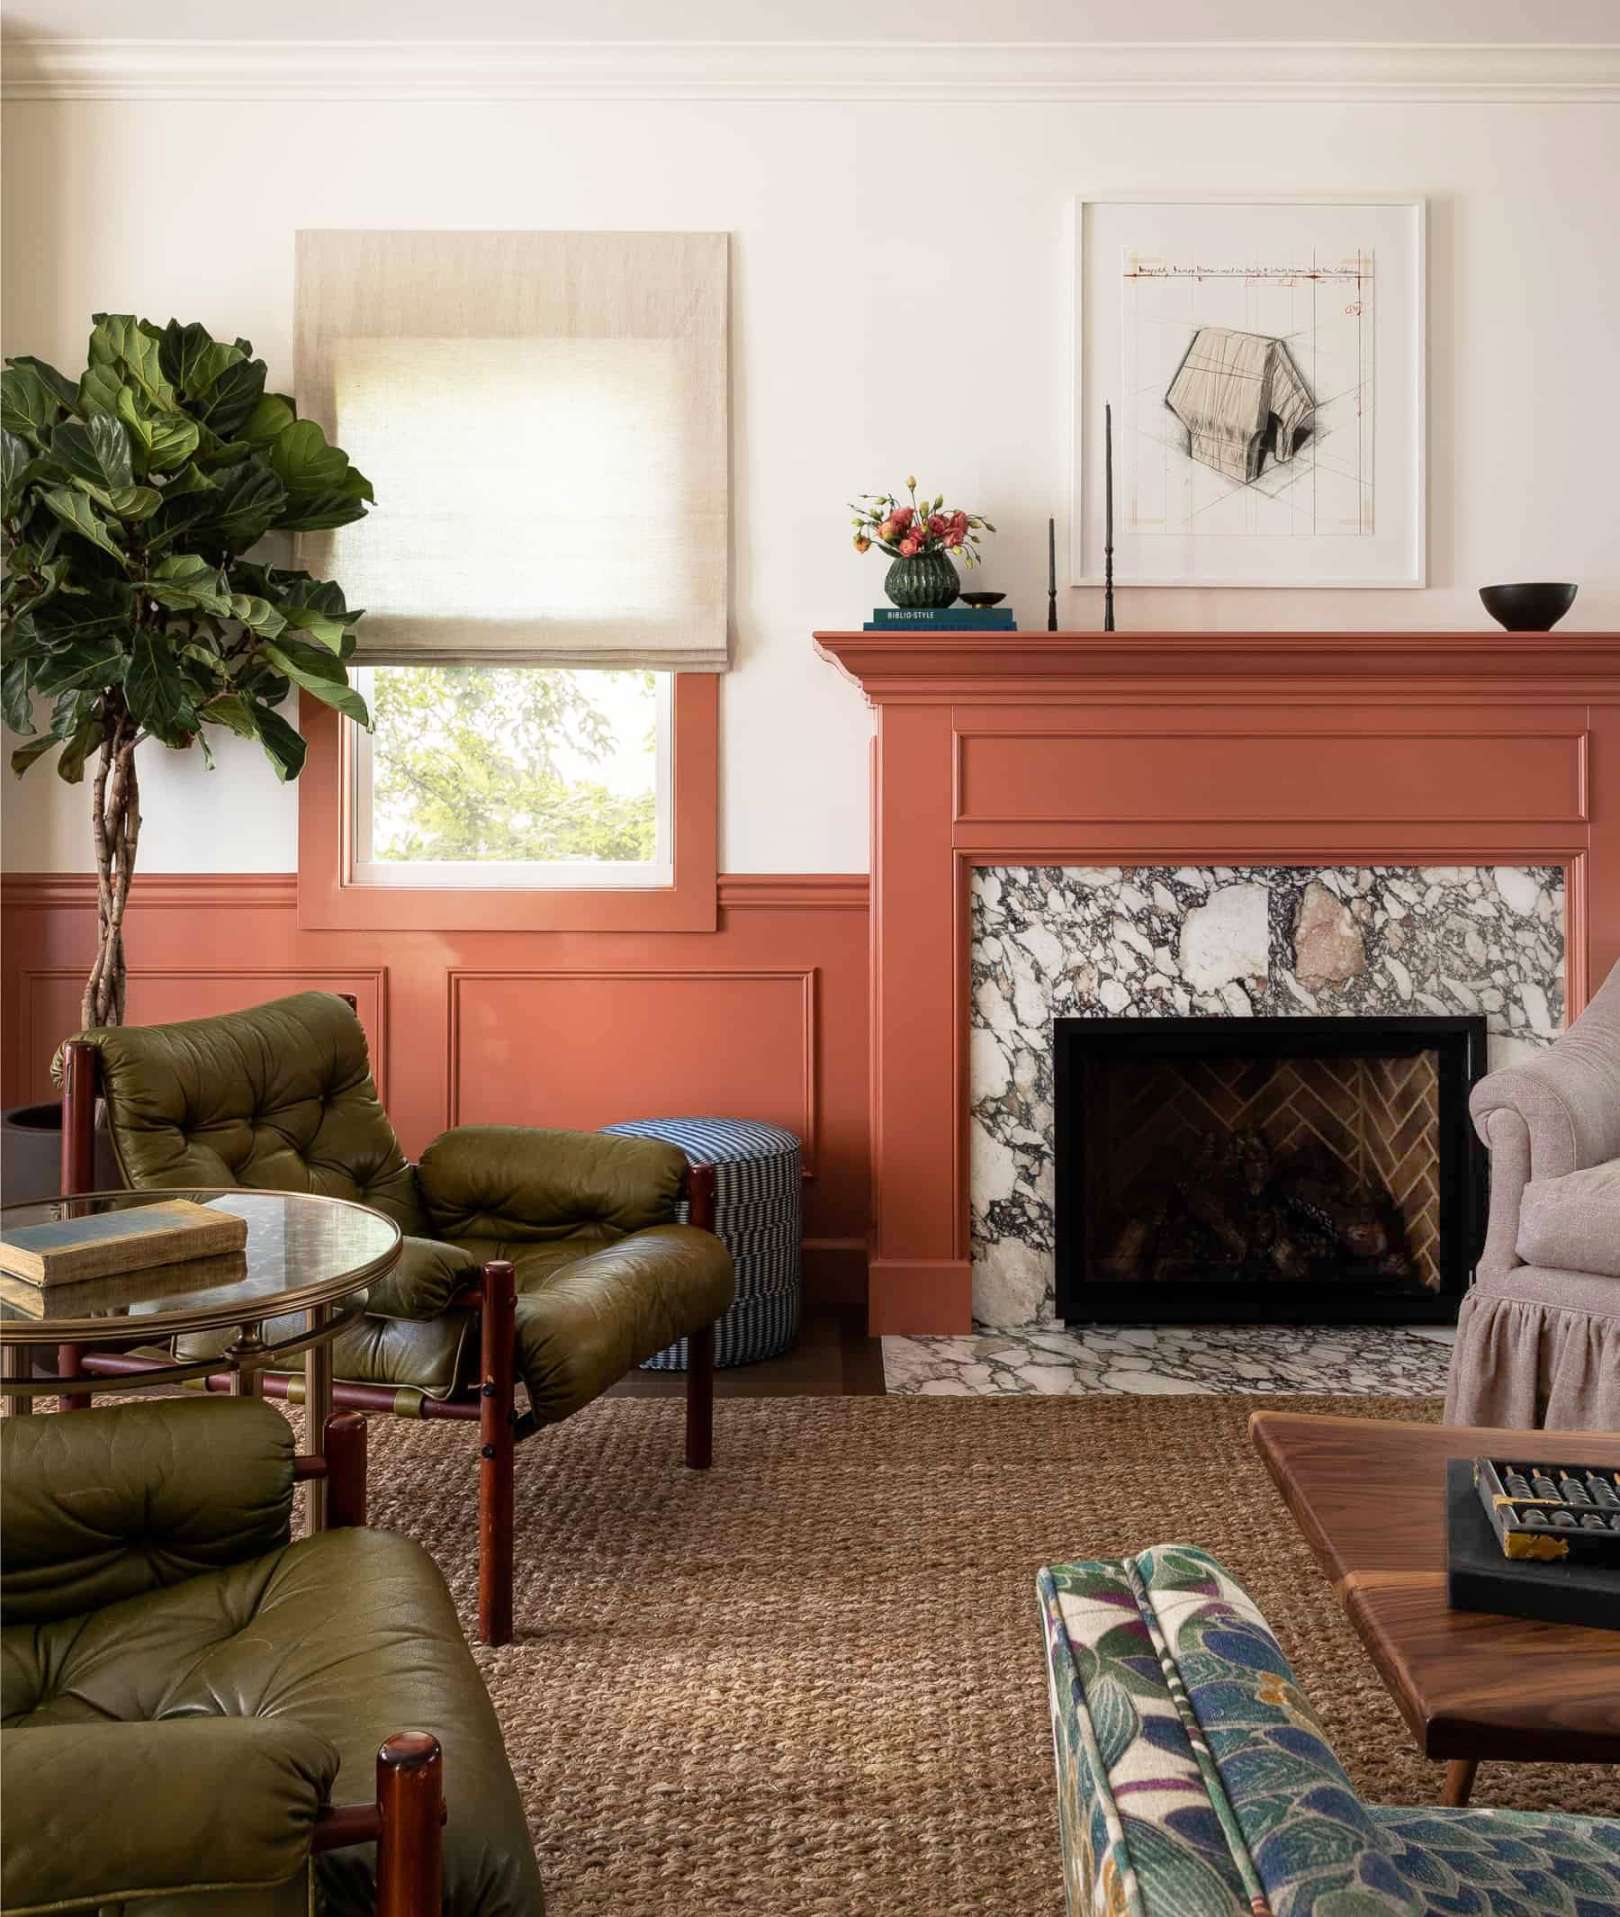 Stylish Painted Fireplaces That Look Modern and Cozy